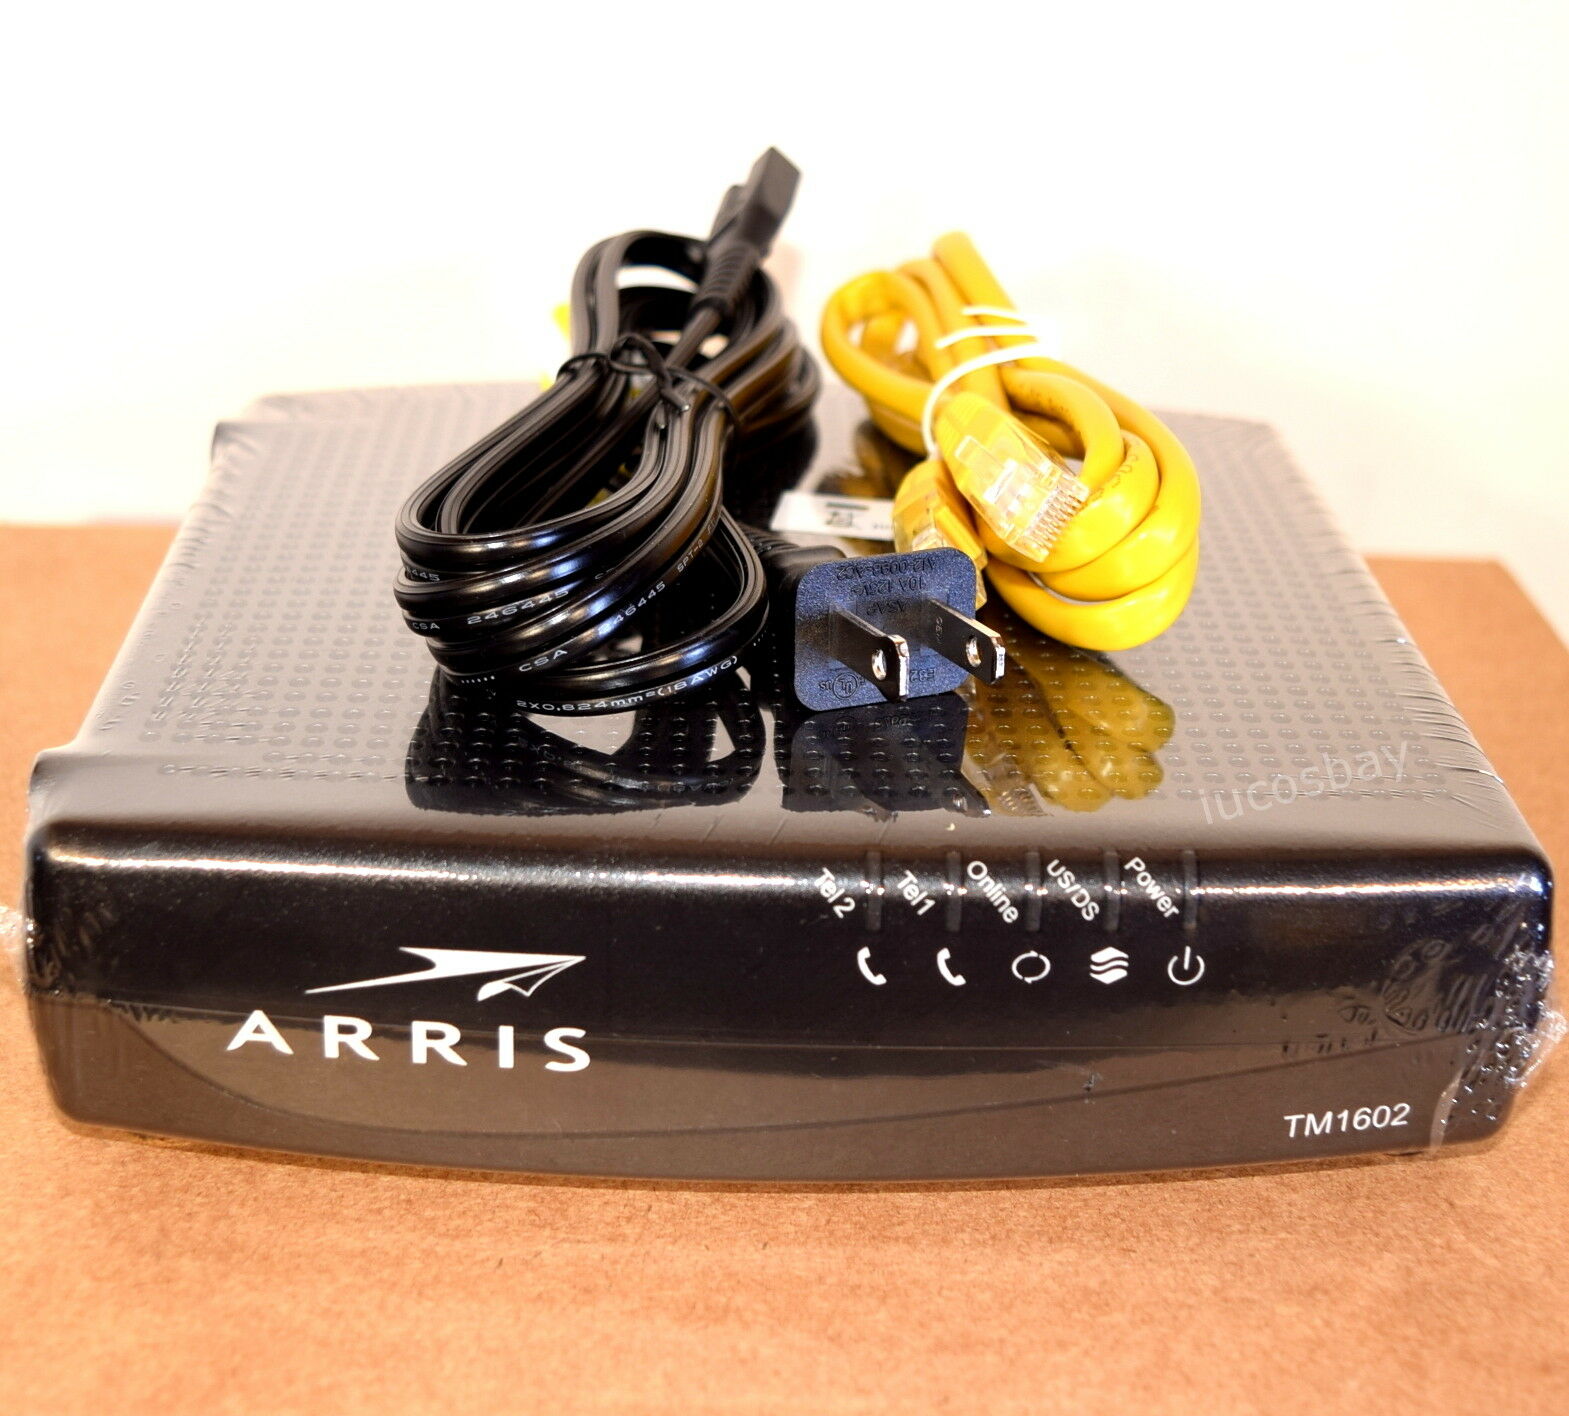 Arris Tm1602a Docsis 3.0 Telephony Cable Modem  For Charter Optimum Cablevision